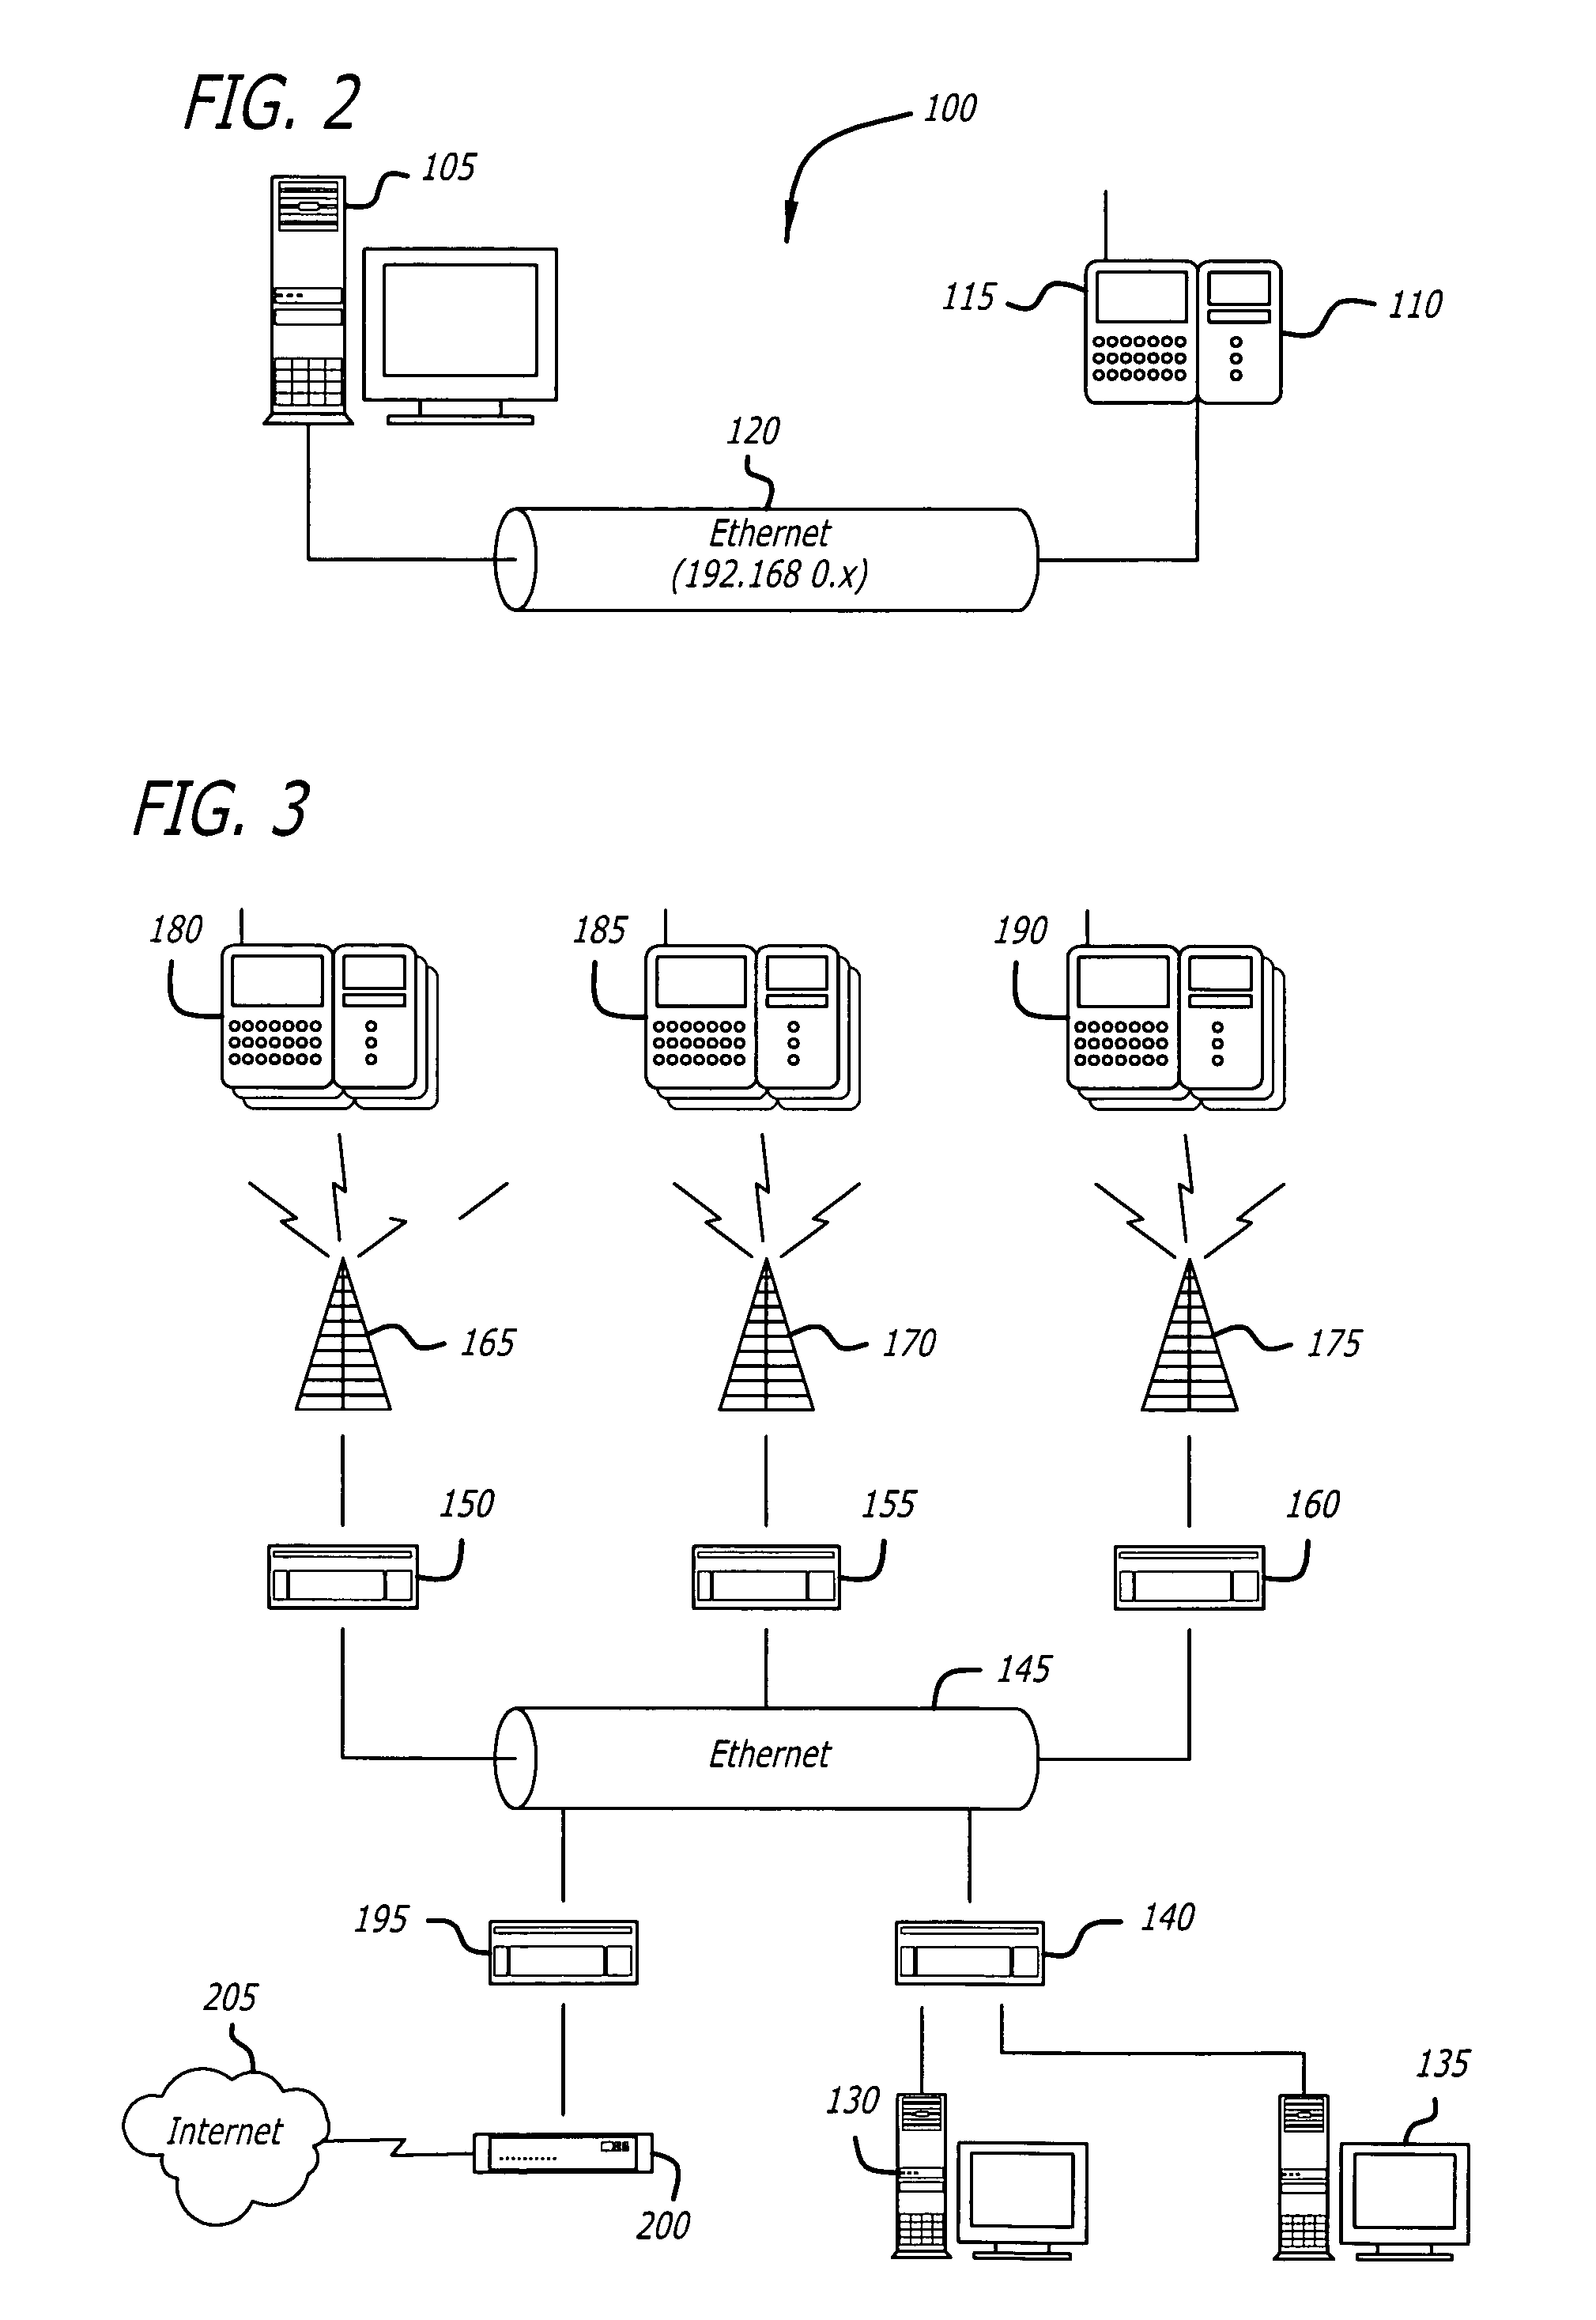 System and method for network discovery and connection management